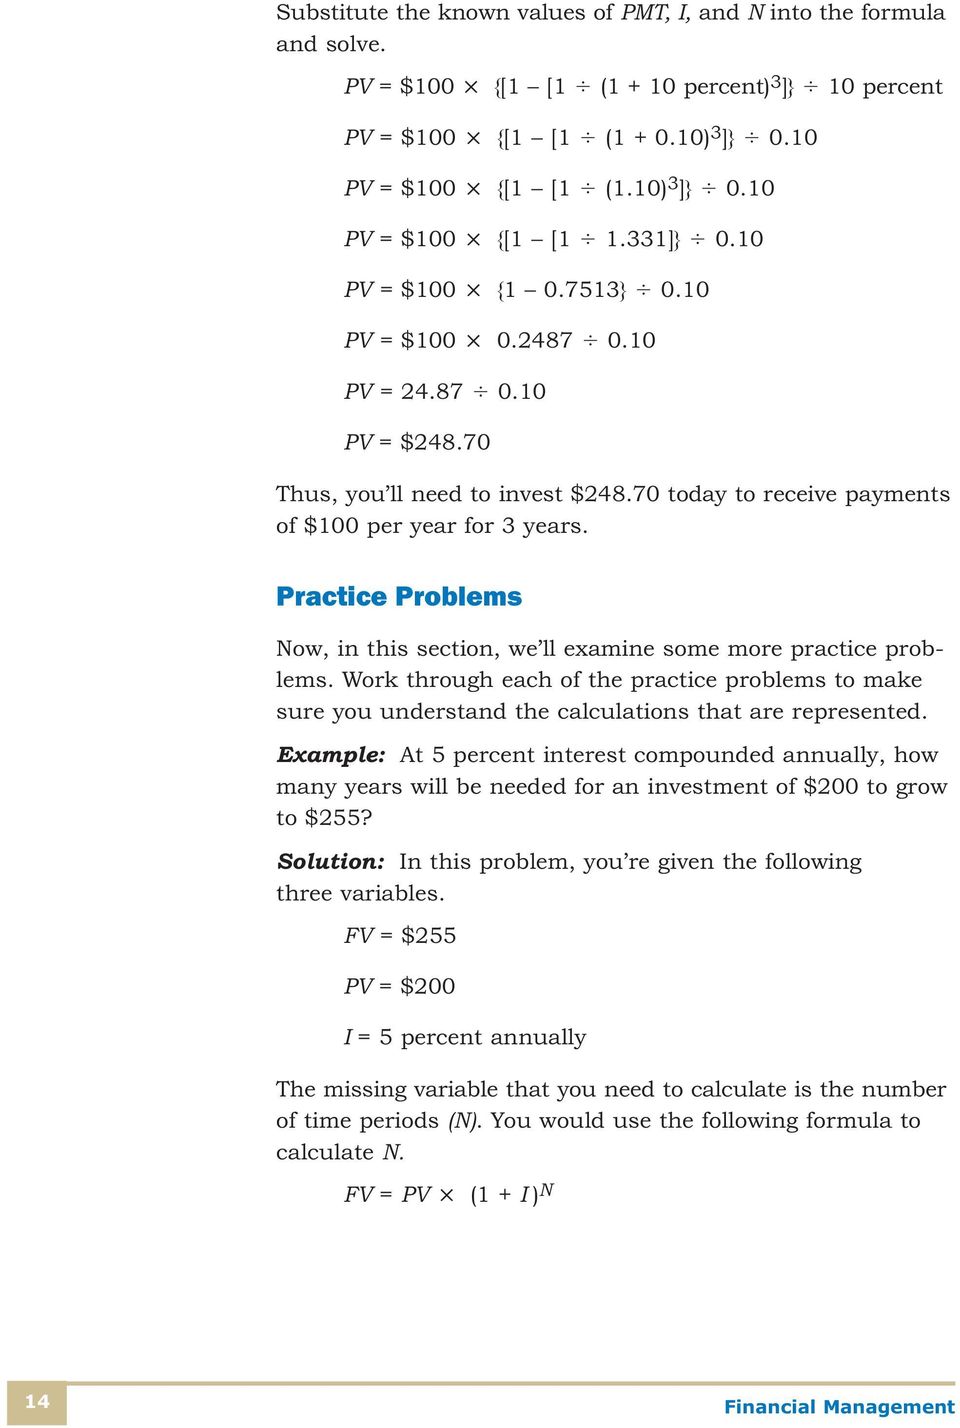 Practice Problems Now, in this section, we ll examine some more practice problems. Work through each of the practice problems to make sure you understand the calculations that are represented.